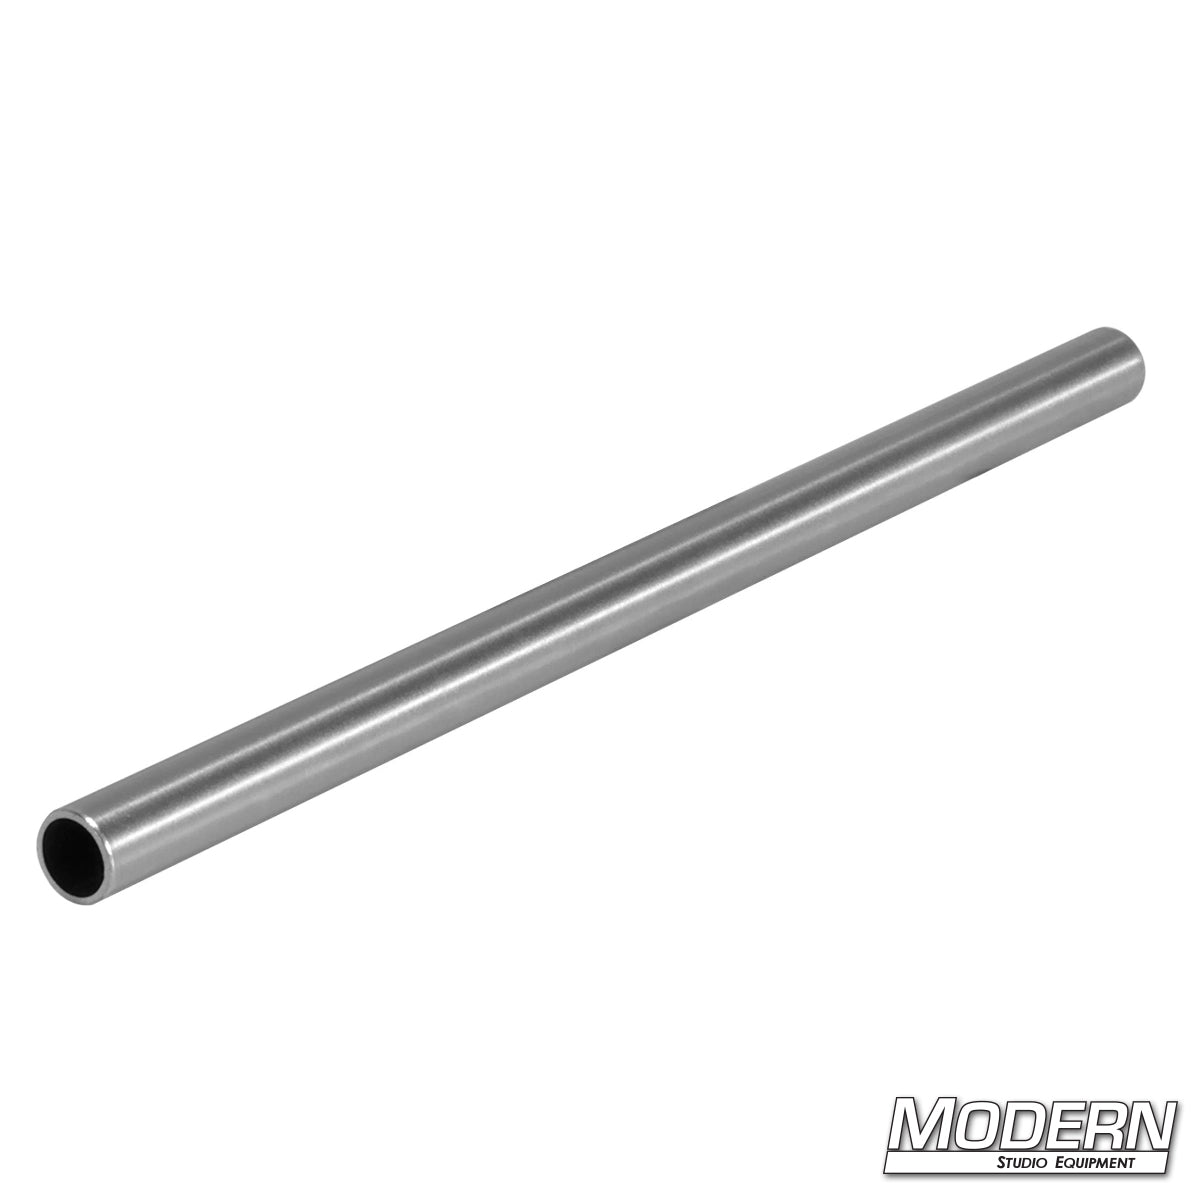 Stainless Steel Hollow Rod (5/8)